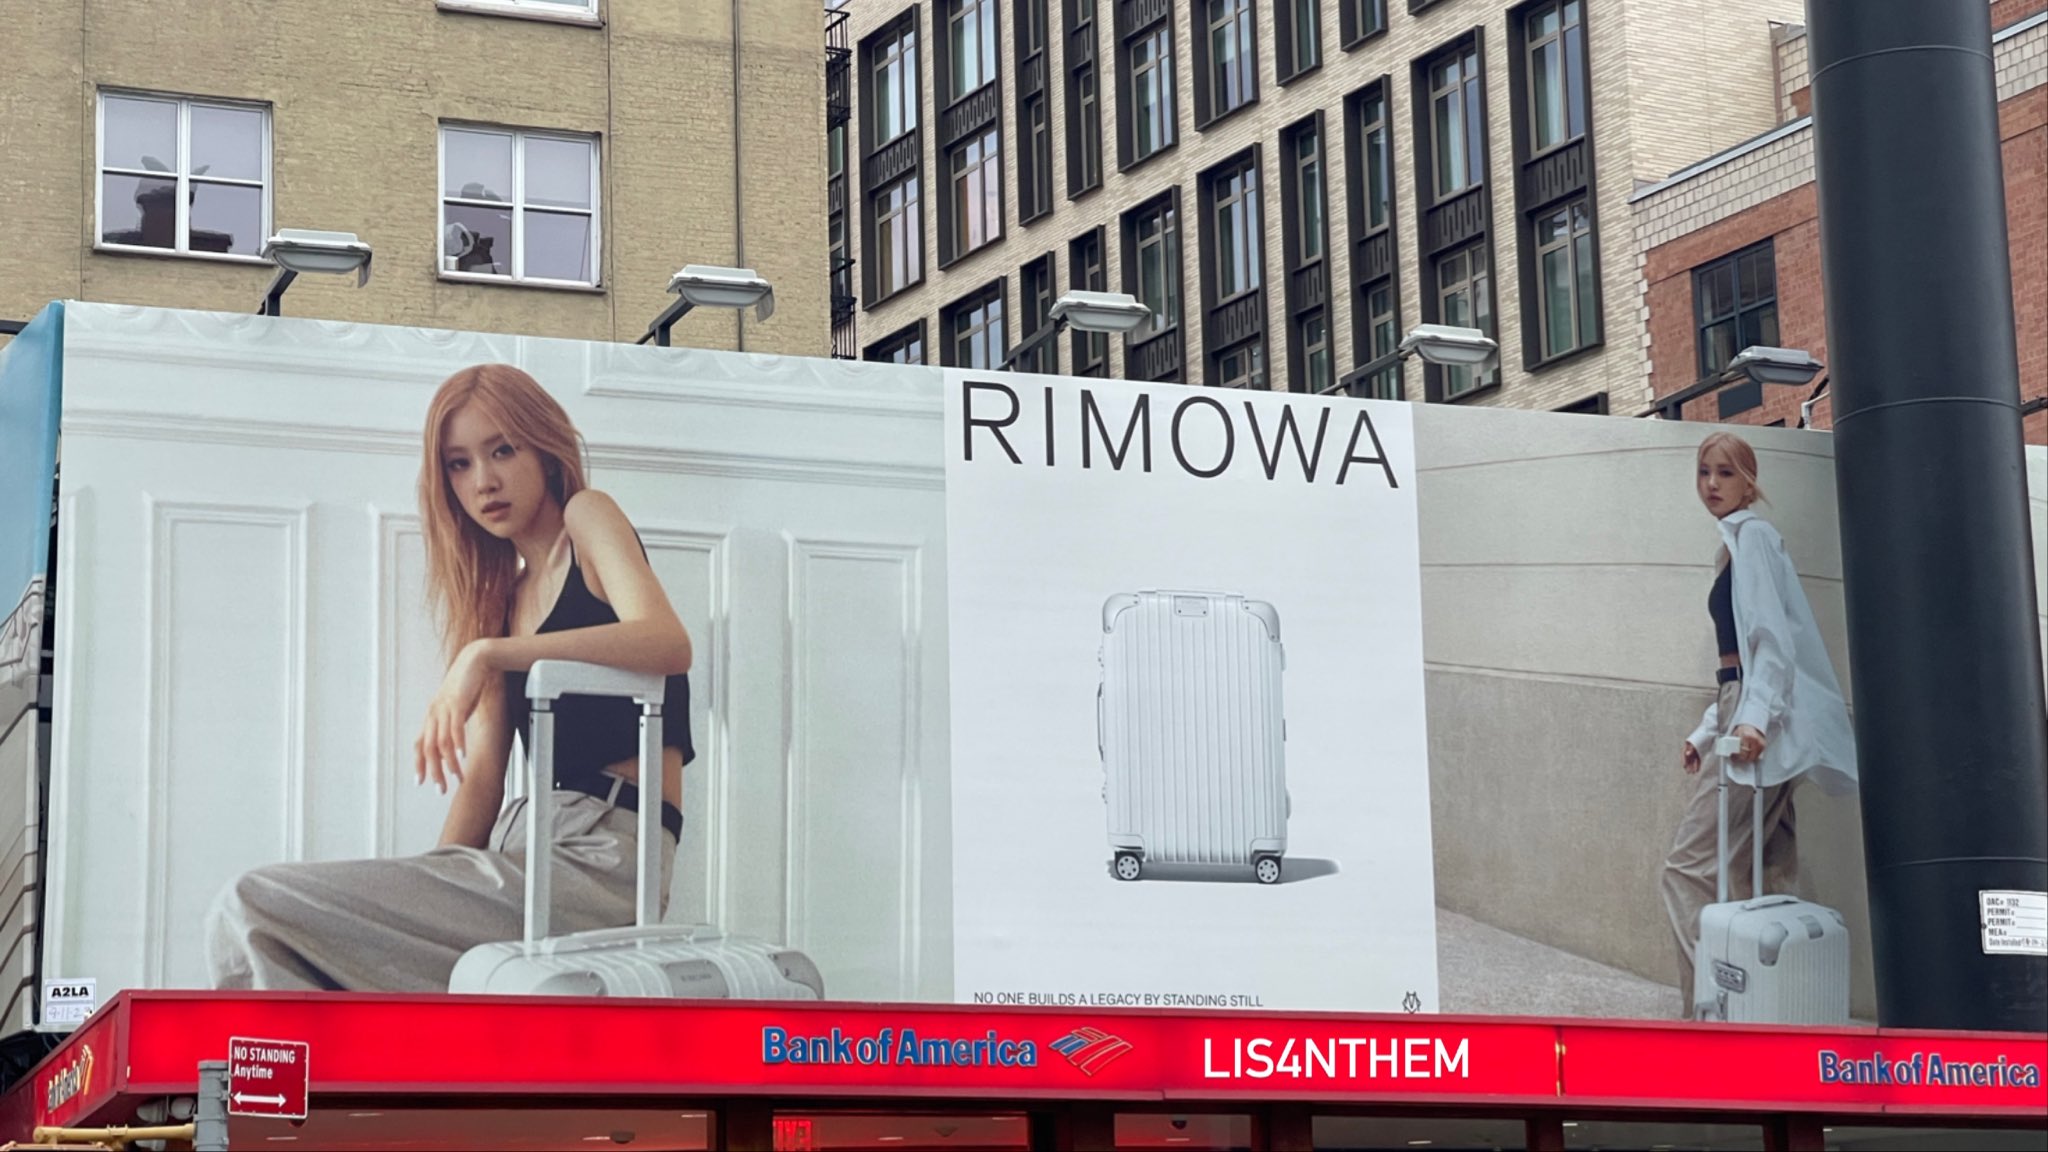 No one builds a legacy by standing still” ~ Rimowa ad campaign